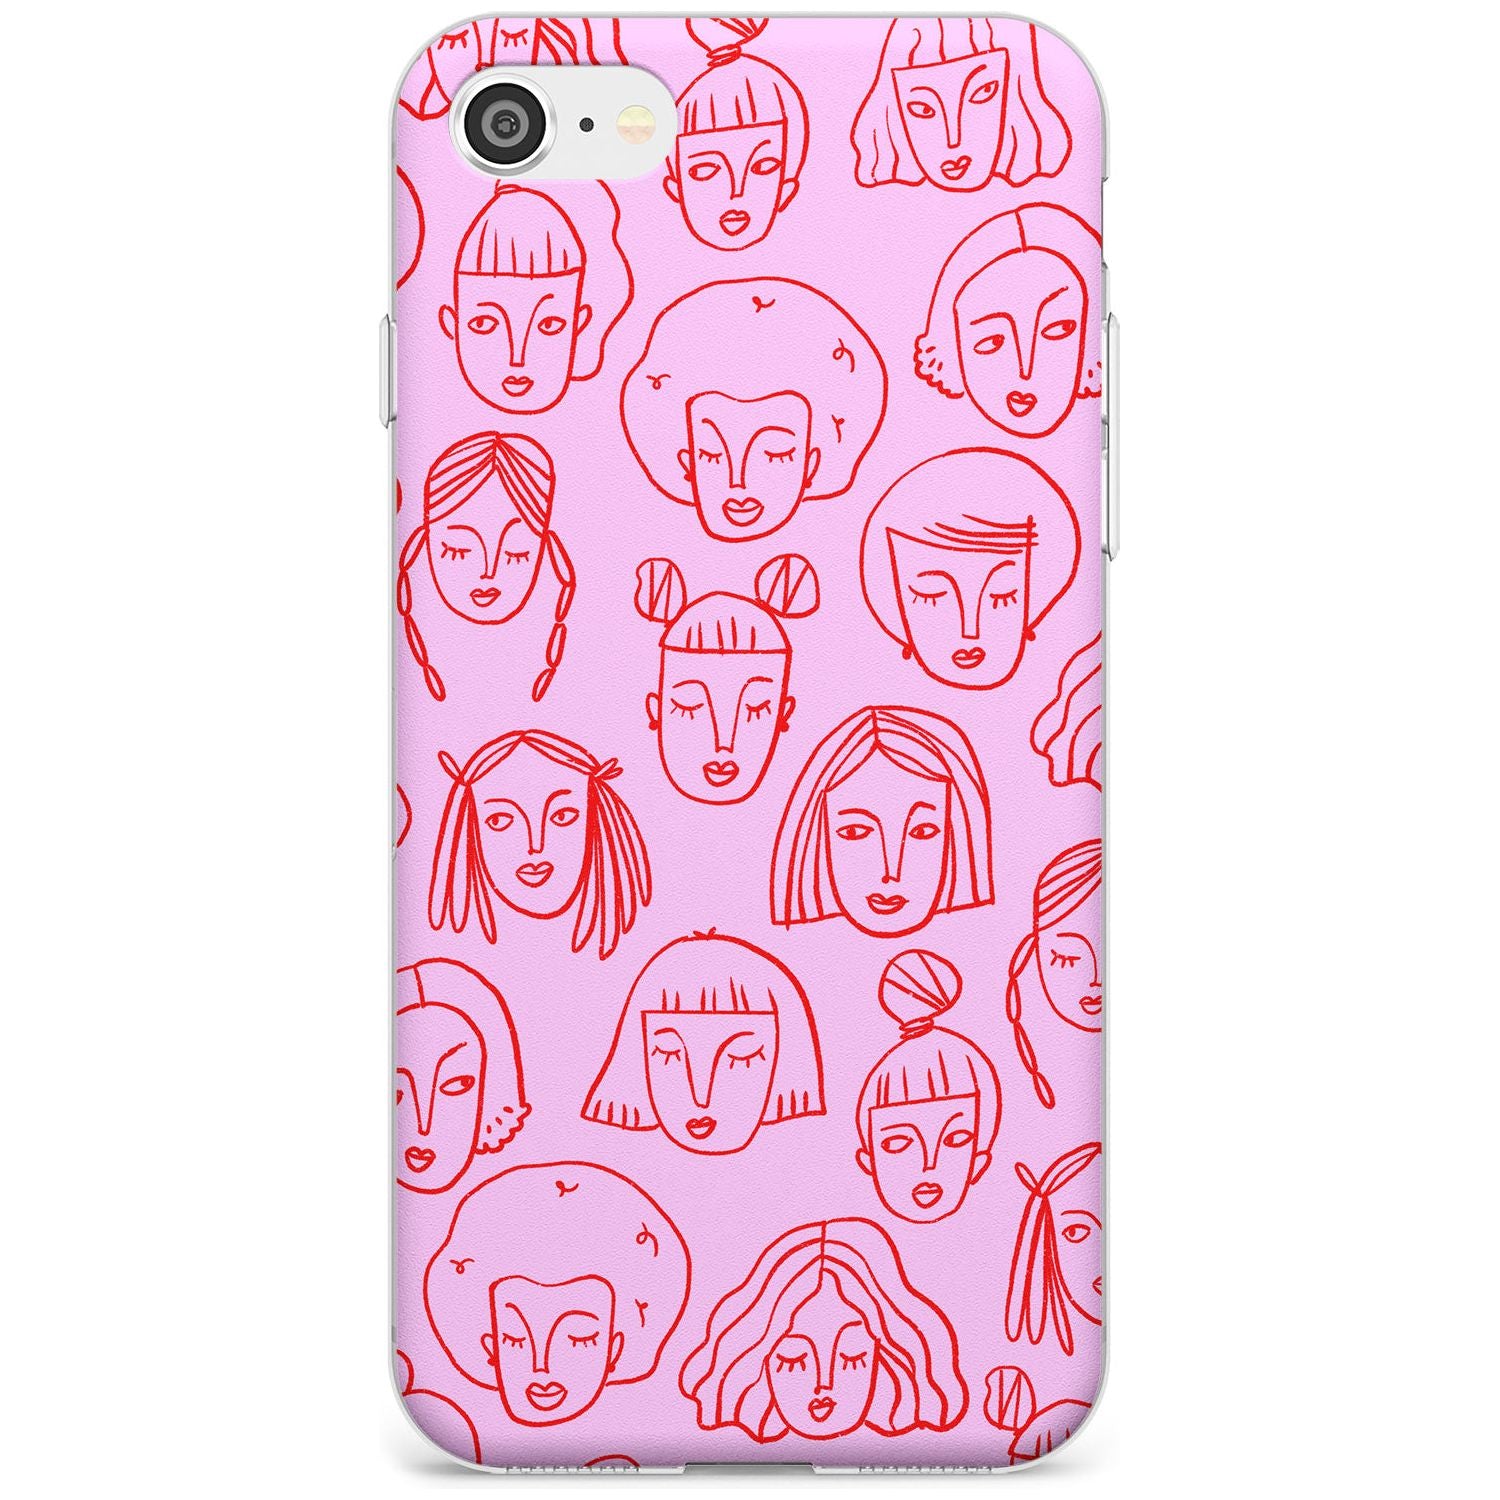 Girl Portrait Doodles in Pink & Red Slim TPU Phone Case for iPhone SE 8 7 Plus